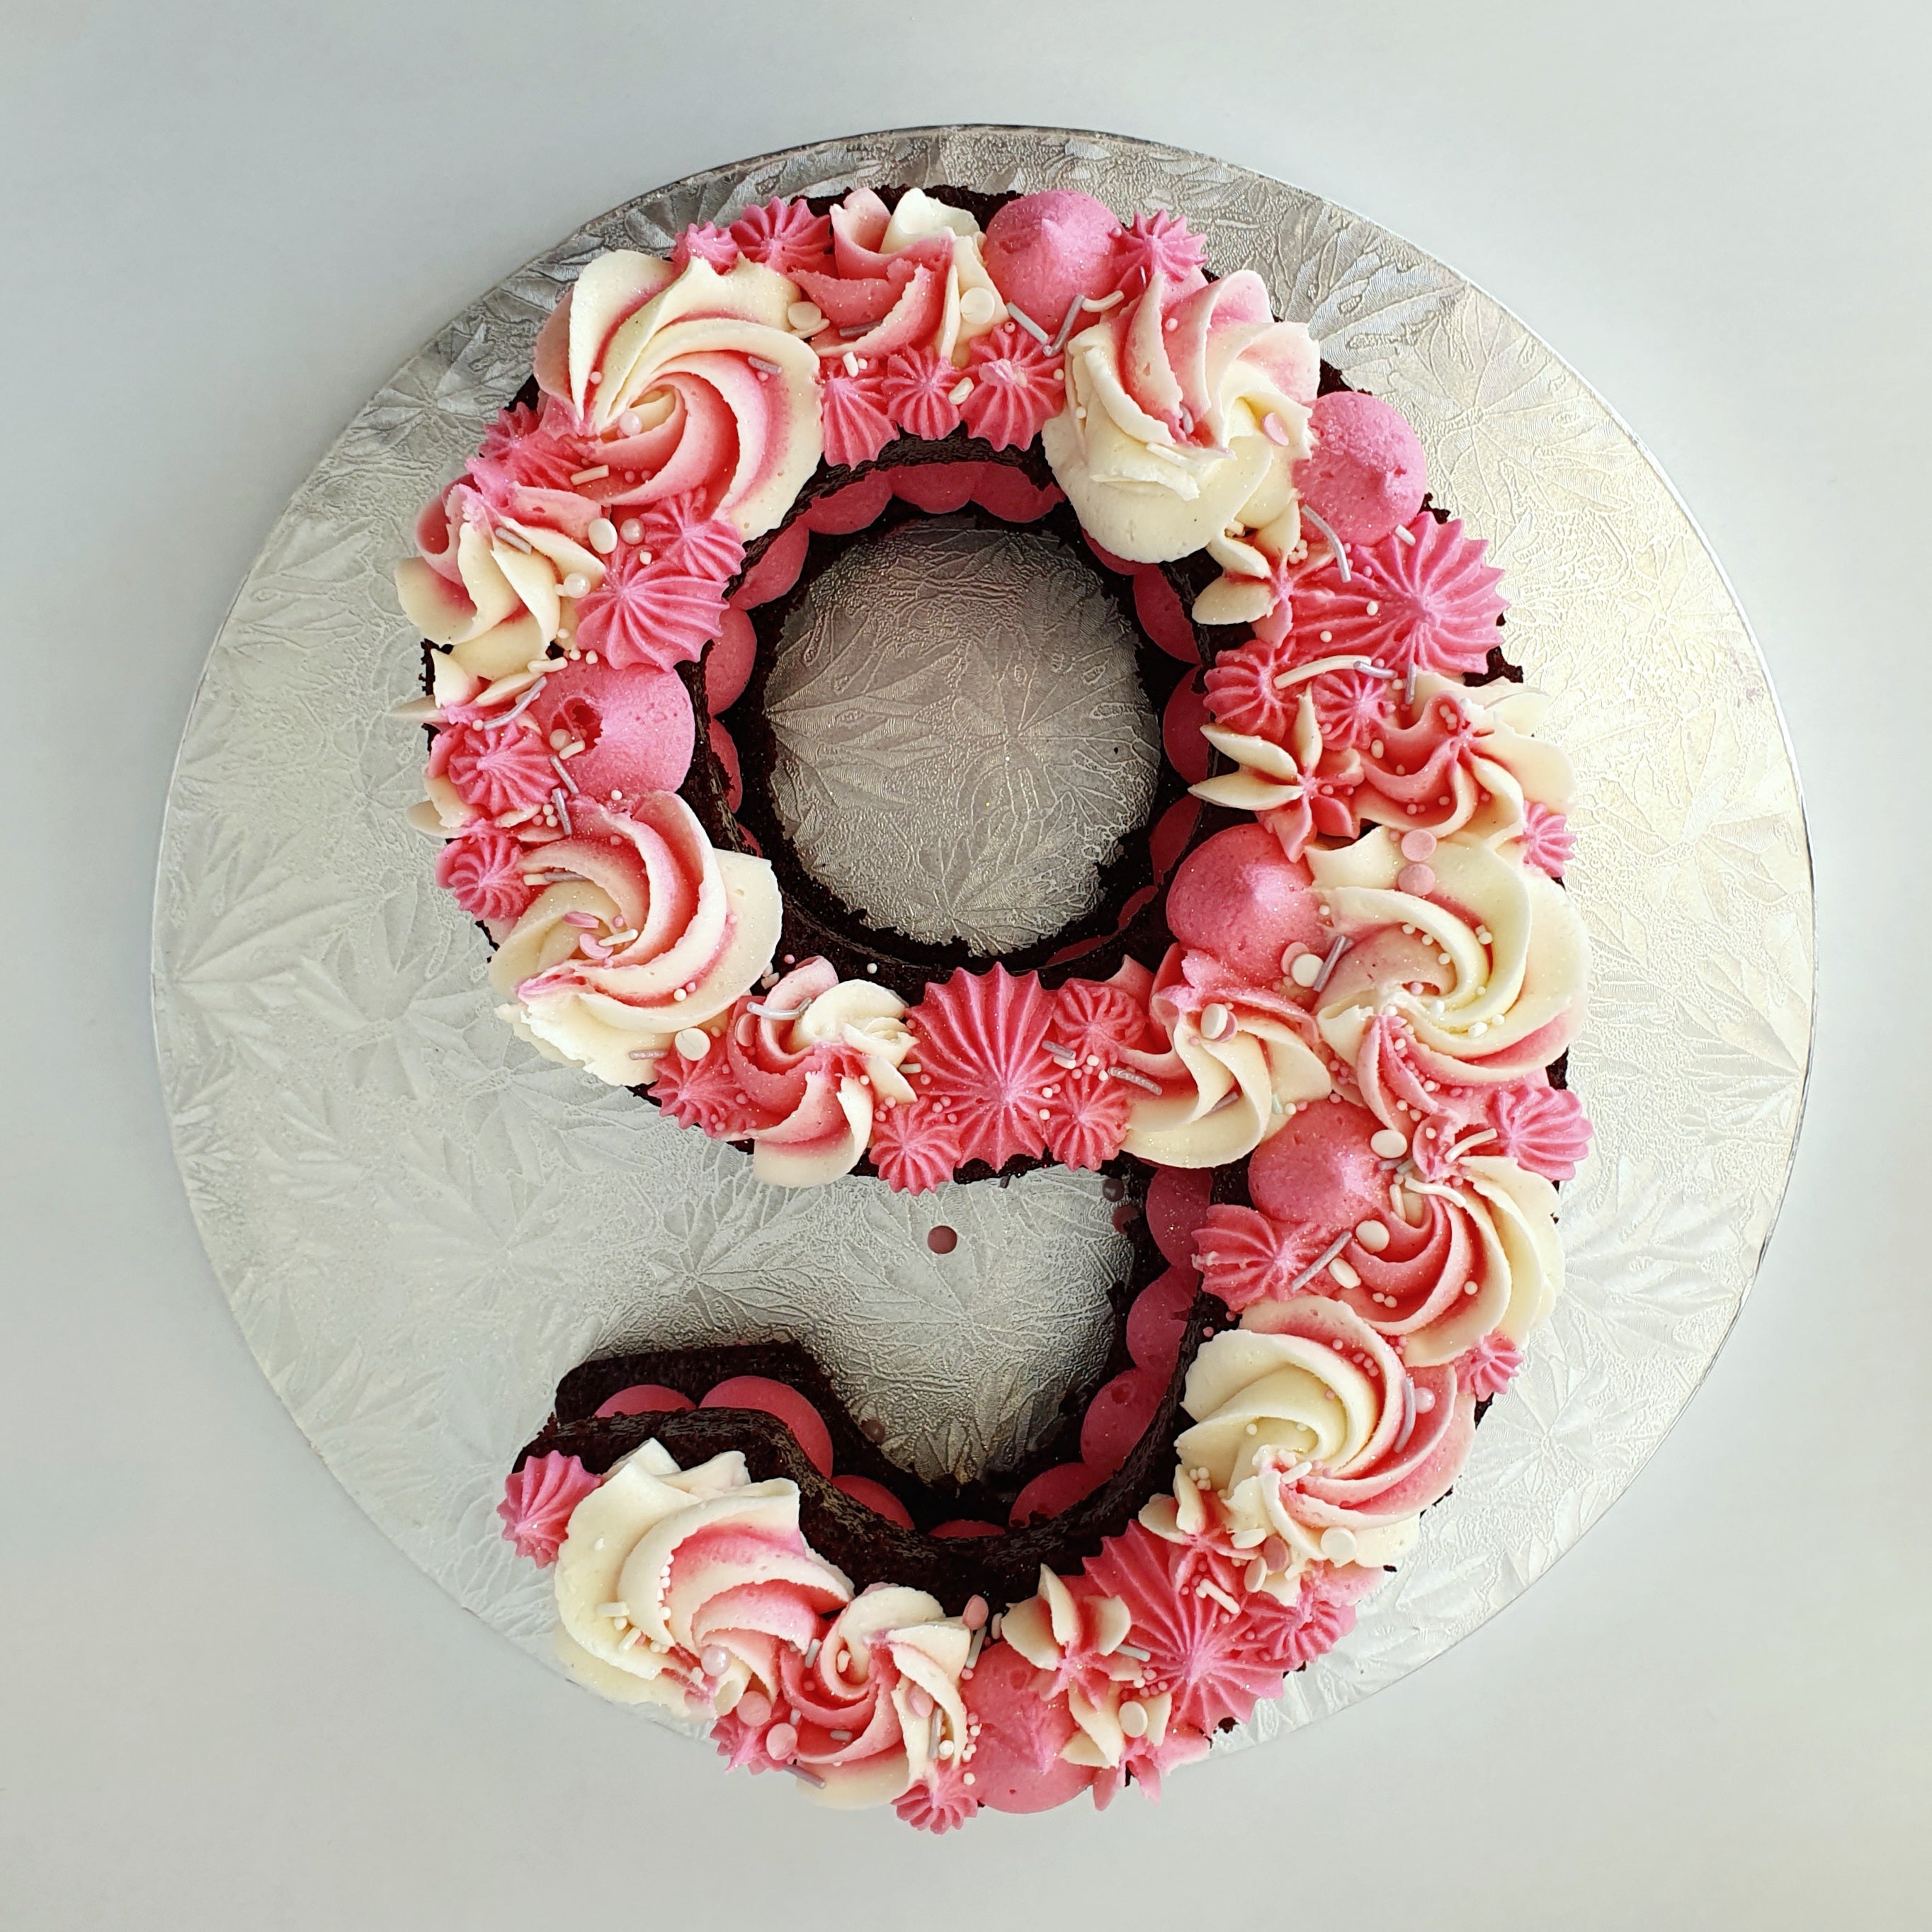 Big Number Cake and Red Rose Flower. Cake Shape of Number 8 Decorated White  Creamcheese, Raspberry and Coconut Candy. Stock Image - Image of candy,  number: 141613219